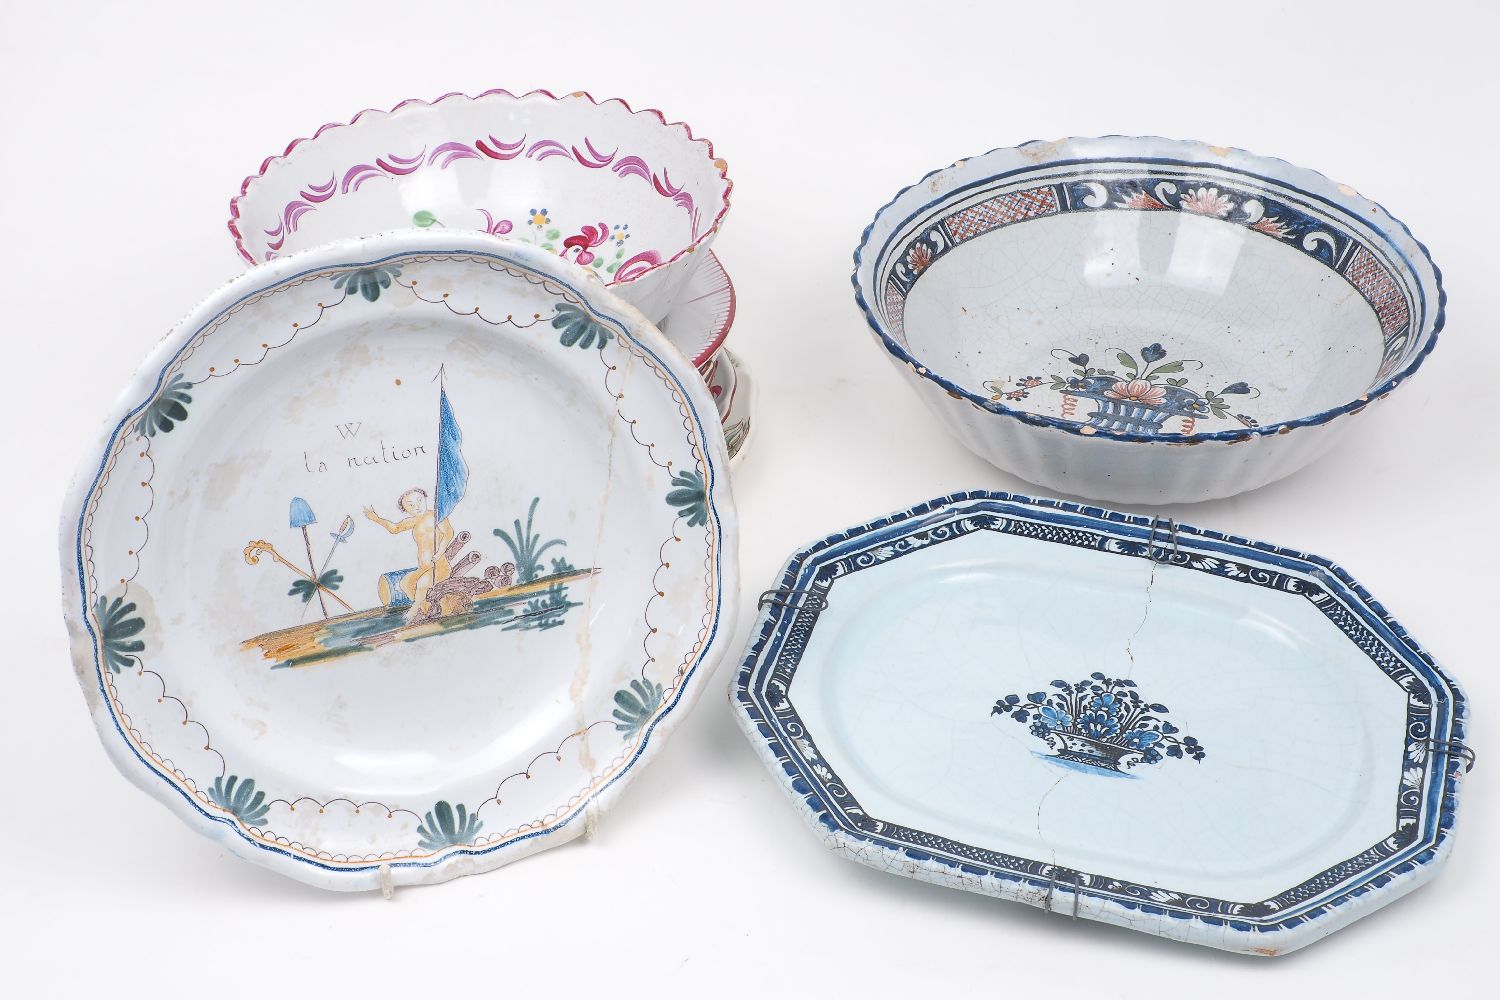 A collection of continental tin-glazed earthenware platters and bowls, late 19th century and